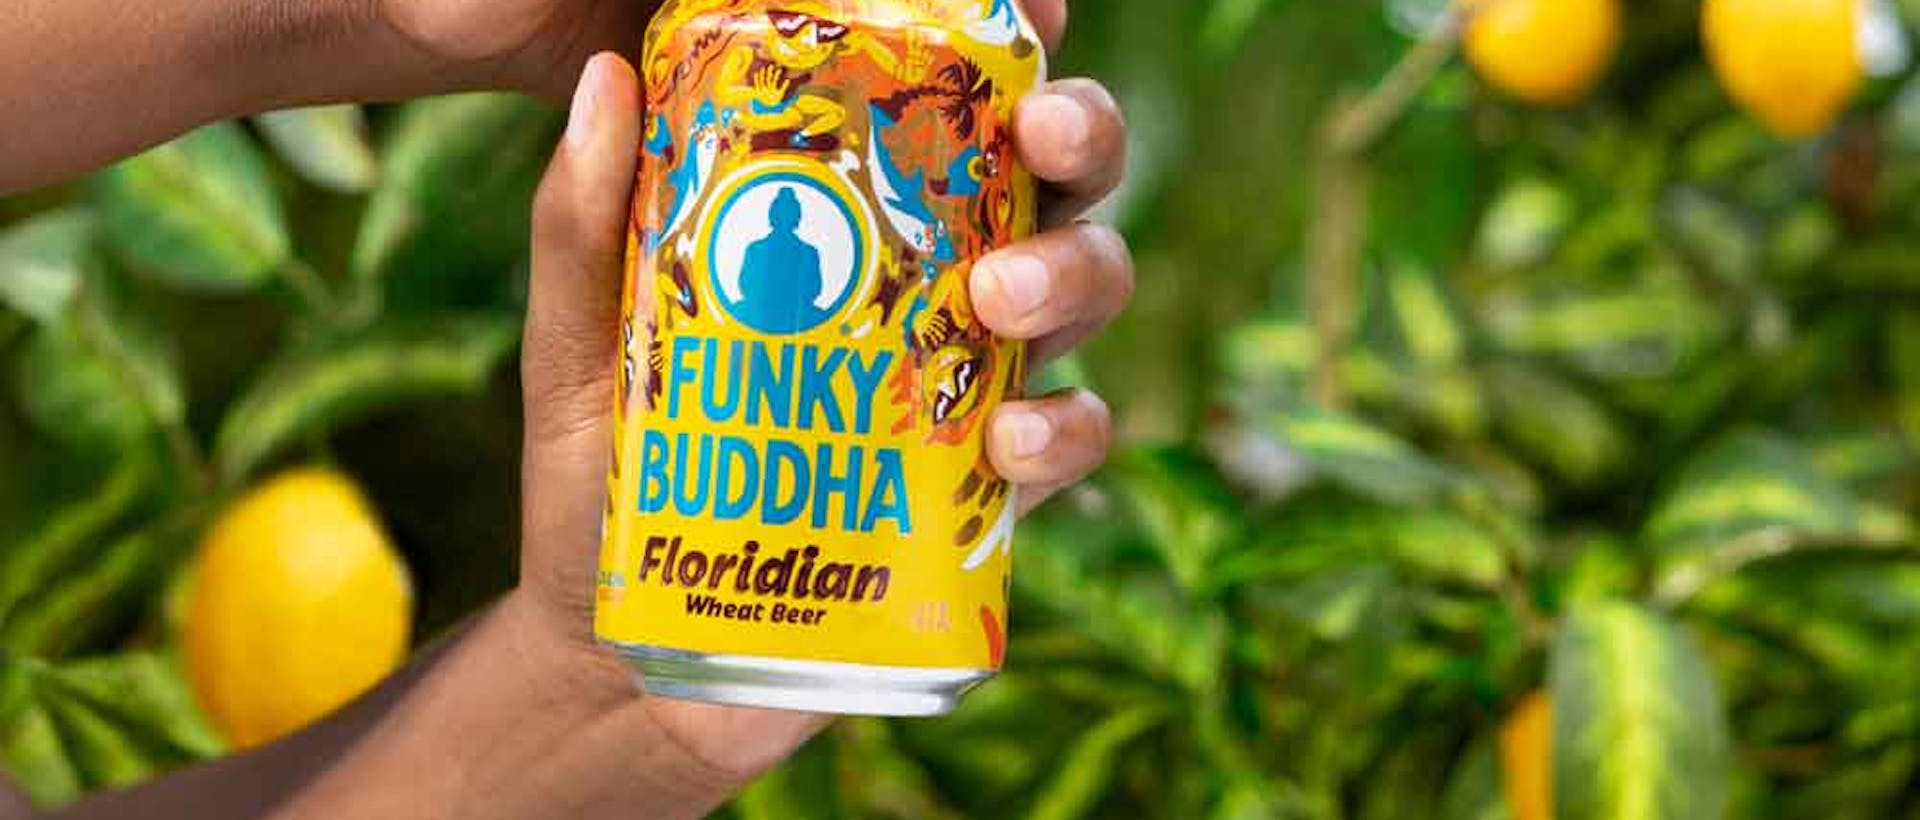 Opening a Funky Buddha Floridian Wheat Beer